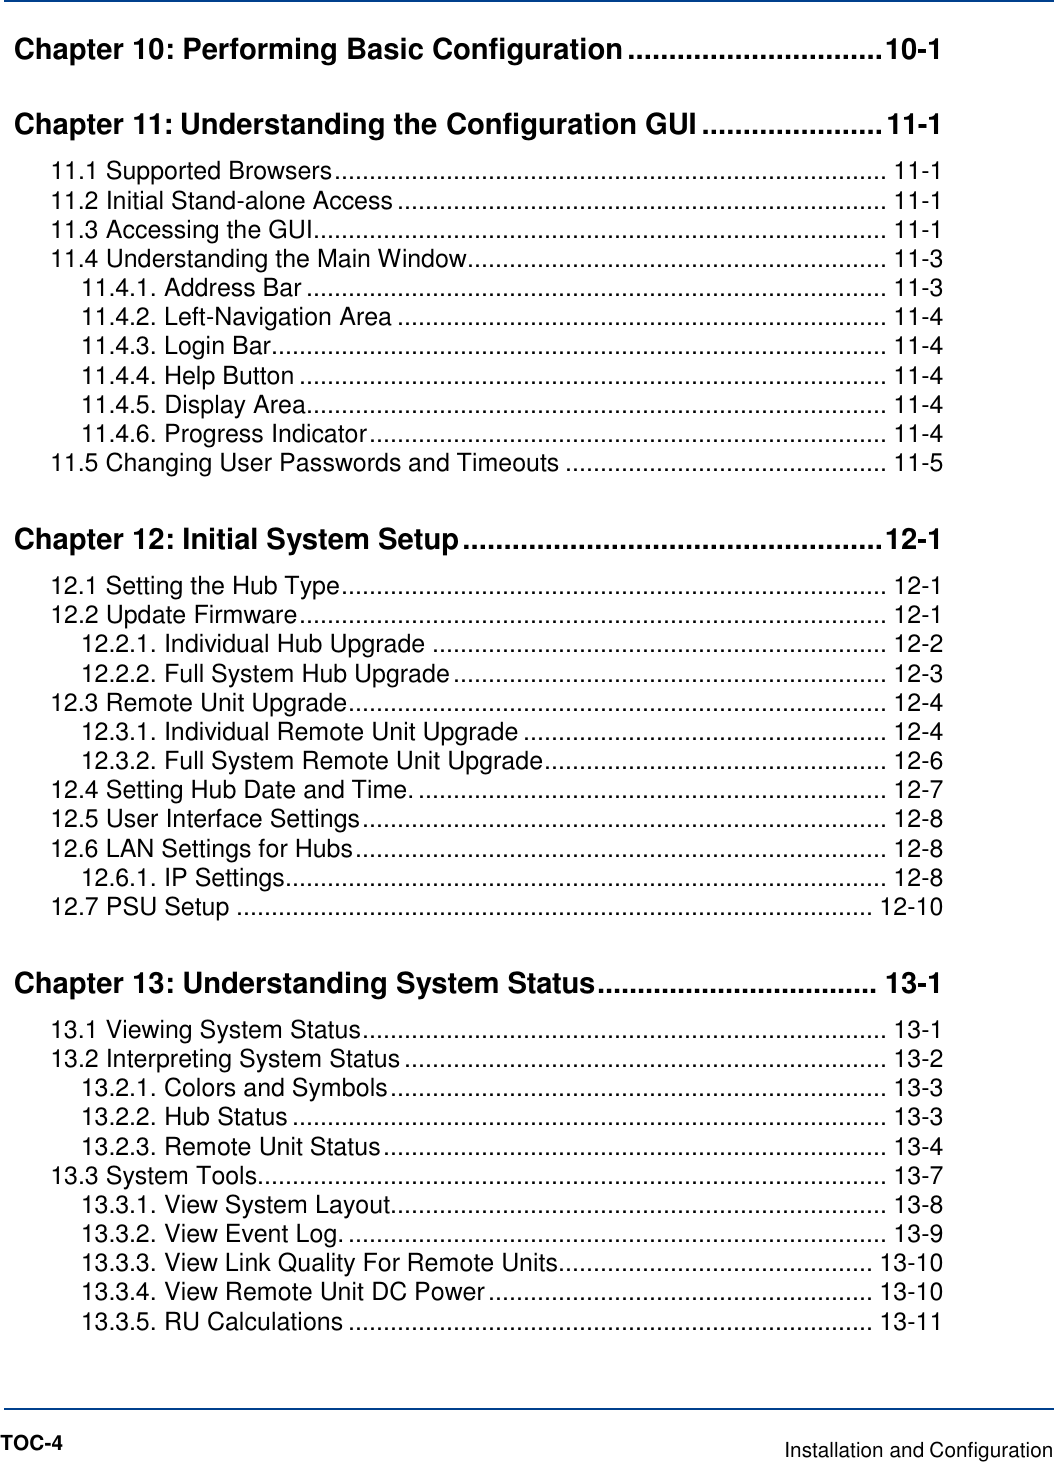   Chapter 10: Performing Basic Configuration ............................... 10-1 Chapter 11: Understanding the Configuration GUI ...................... 11-1 11.1 Supported Browsers ............................................................................... 11-1 11.2 Initial Stand-alone Access ...................................................................... 11-1 11.3 Accessing the GUI .................................................................................. 11-1 11.4 Understanding the Main Window ............................................................ 11-3 11.4.1. Address Bar ................................................................................... 11-3 11.4.2. Left-Navigation Area ...................................................................... 11-4 11.4.3. Login Bar ........................................................................................ 11-4 11.4.4. Help Button .................................................................................... 11-4 11.4.5. Display Area................................................................................... 11-4 11.4.6. Progress Indicator .......................................................................... 11-4 11.5 Changing User Passwords and Timeouts .............................................. 11-5 Chapter 12: Initial System Setup ................................................... 12-1 12.1 Setting the Hub Type .............................................................................. 12-1 12.2 Update Firmware .................................................................................... 12-1 12.2.1. Individual Hub Upgrade ................................................................. 12-2 12.2.2. Full System Hub Upgrade .............................................................. 12-3 12.3 Remote Unit Upgrade ............................................................................. 12-4 12.3.1. Individual Remote Unit Upgrade .................................................... 12-4 12.3.2. Full System Remote Unit Upgrade ................................................. 12-6 12.4 Setting Hub Date and Time. ................................................................... 12-7 12.5 User Interface Settings ........................................................................... 12-8 12.6 LAN Settings for Hubs ............................................................................ 12-8 12.6.1. IP Settings ...................................................................................... 12-8 12.7 PSU Setup ........................................................................................... 12-10 Chapter 13: Understanding System Status ................................... 13-1 13.1 Viewing System Status ........................................................................... 13-1 13.2 Interpreting System Status ..................................................................... 13-2 13.2.1. Colors and Symbols ....................................................................... 13-3 13.2.2. Hub Status ..................................................................................... 13-3 13.2.3. Remote Unit Status ........................................................................ 13-4 13.3 System Tools.......................................................................................... 13-7 13.3.1. View System Layout....................................................................... 13-8 13.3.2. View Event Log. ............................................................................. 13-9 13.3.3. View Link Quality For Remote Units ............................................. 13-10 13.3.4. View Remote Unit DC Power ....................................................... 13-10 13.3.5. RU Calculations ........................................................................... 13-11 TOC-4  Installation and Configuration 